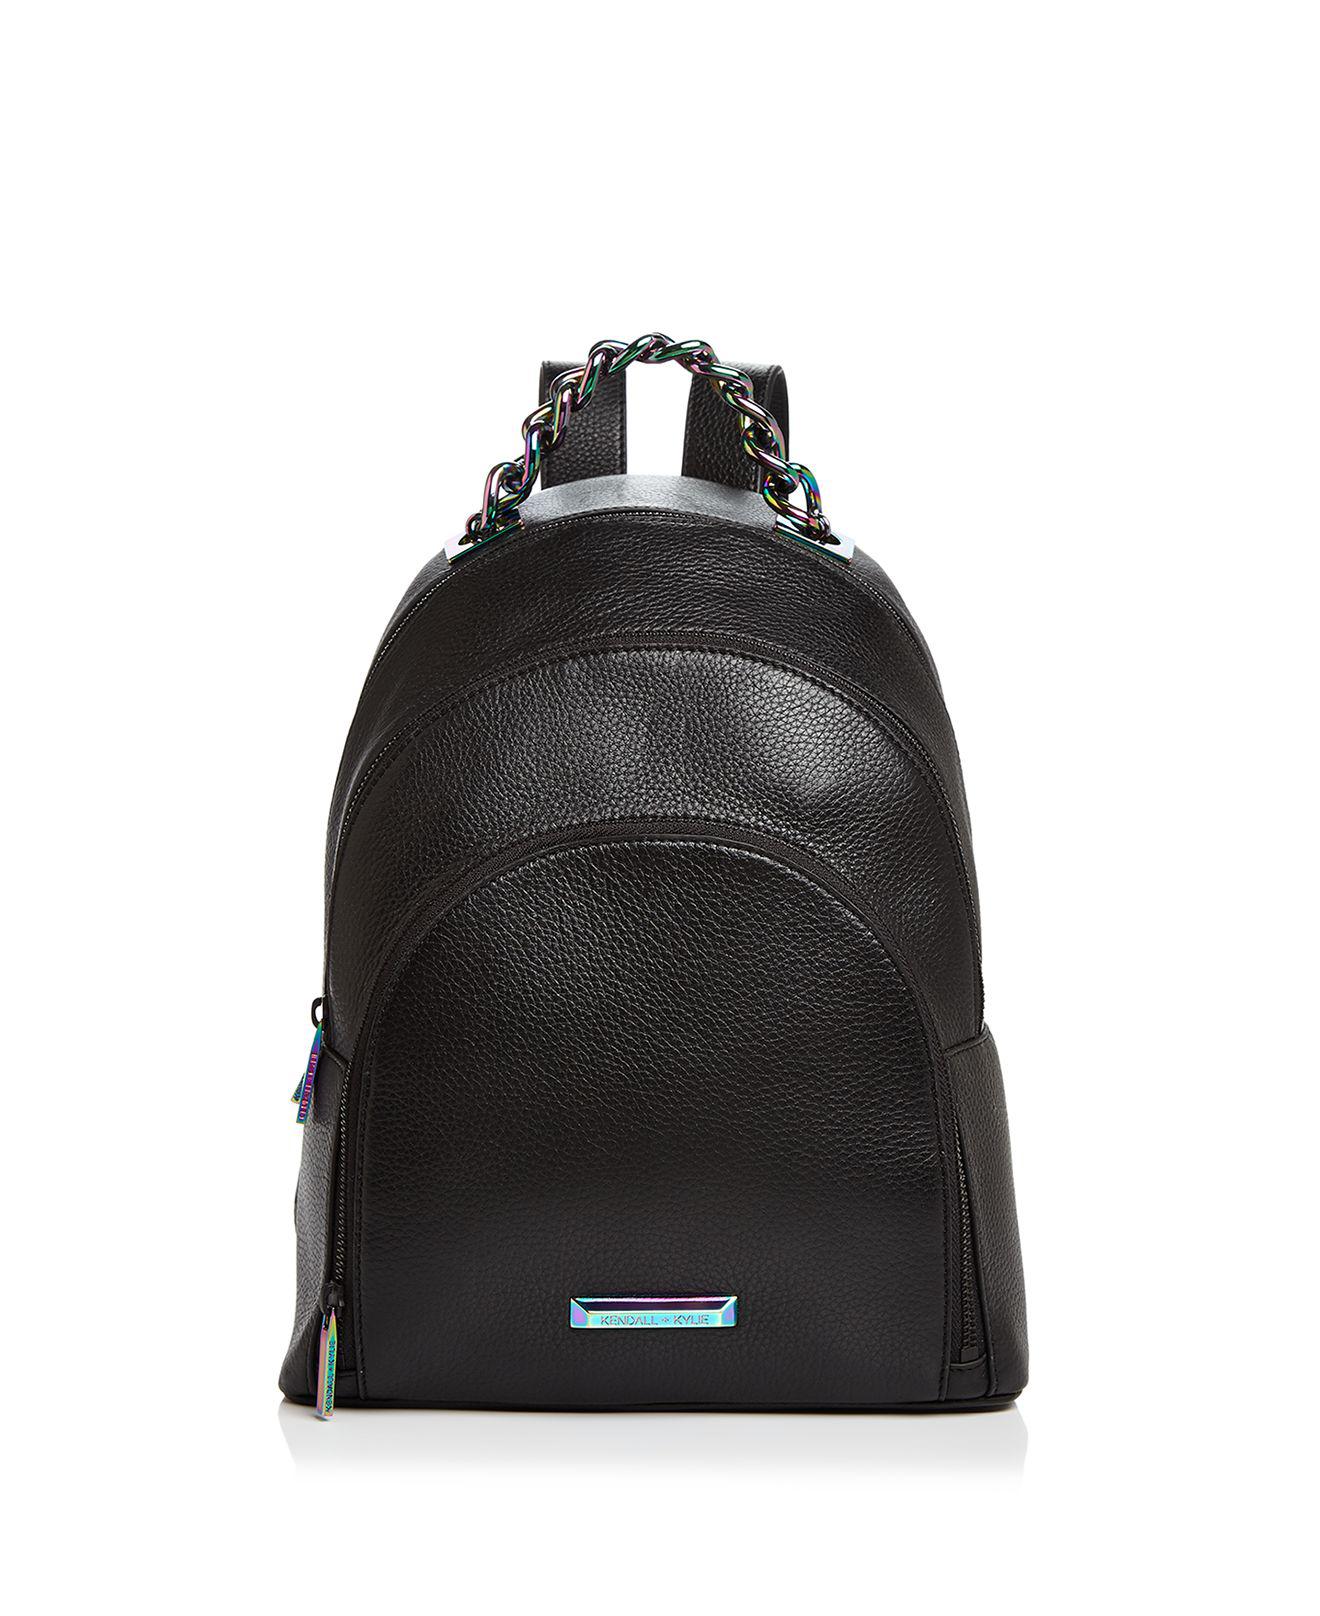 Lyst - Kendall + Kylie Sloane Leather Backpack in Black